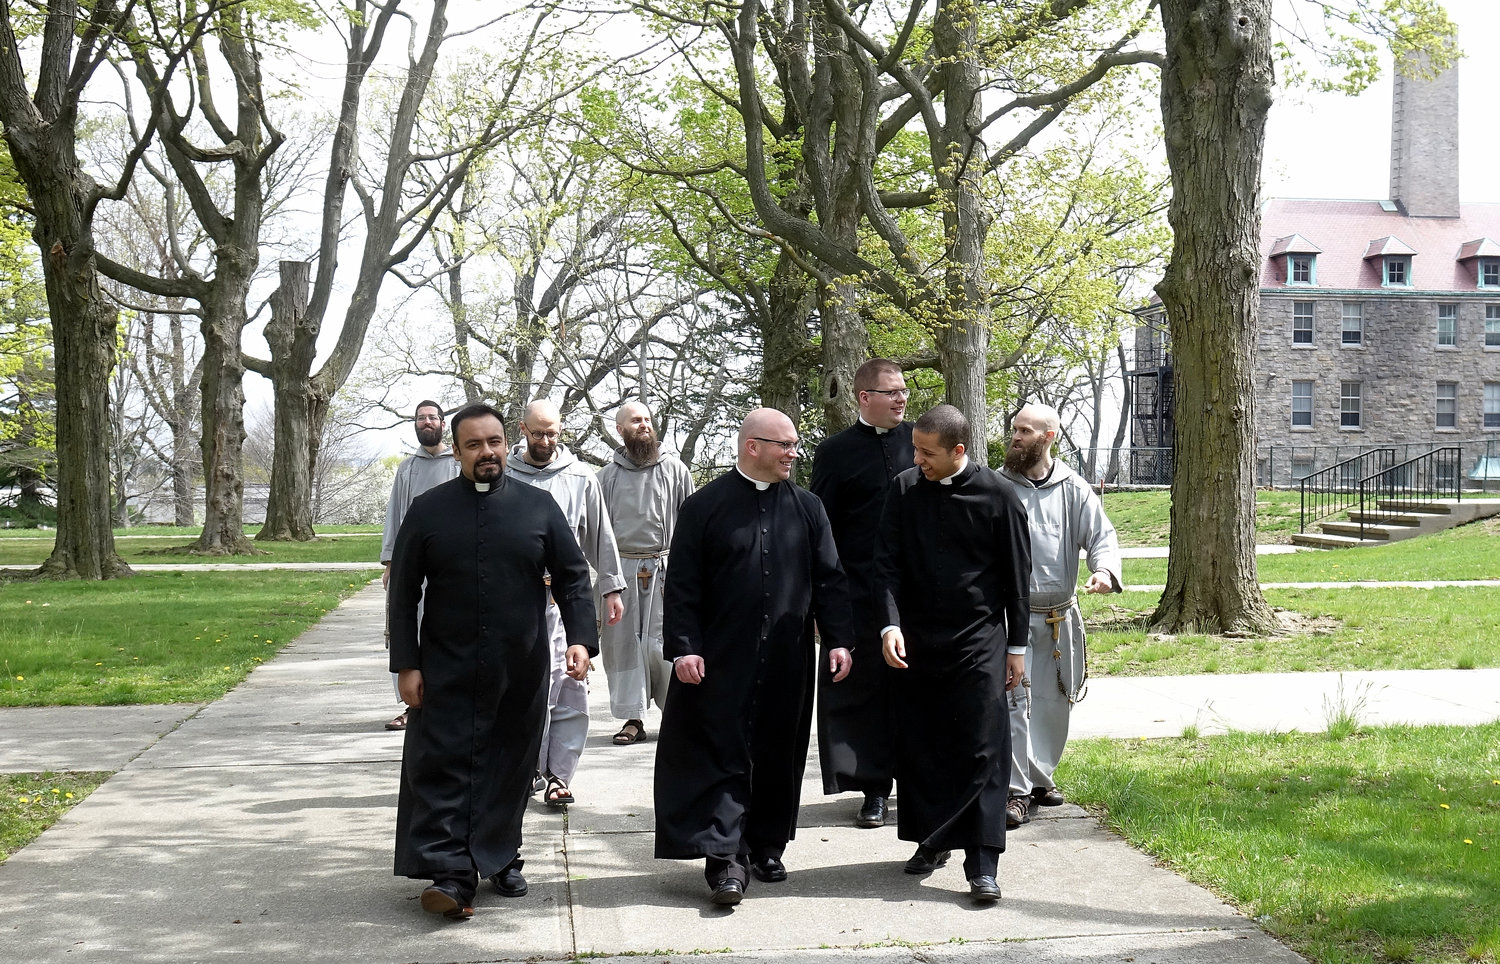 SPRING STROLL—The eight members of the Class of 2021 of St. Joseph’s Seminary enjoy a walk on the tree-lined Dunwoodie campus last month. In the front row, from left, are Father Kevin Panameño, Father Robert Carolan and Father Steven N. Gonzalez. Cardinal Dolan will ordain all eight to the priesthood at a Mass in St. Patrick’s Cathedral May 29.